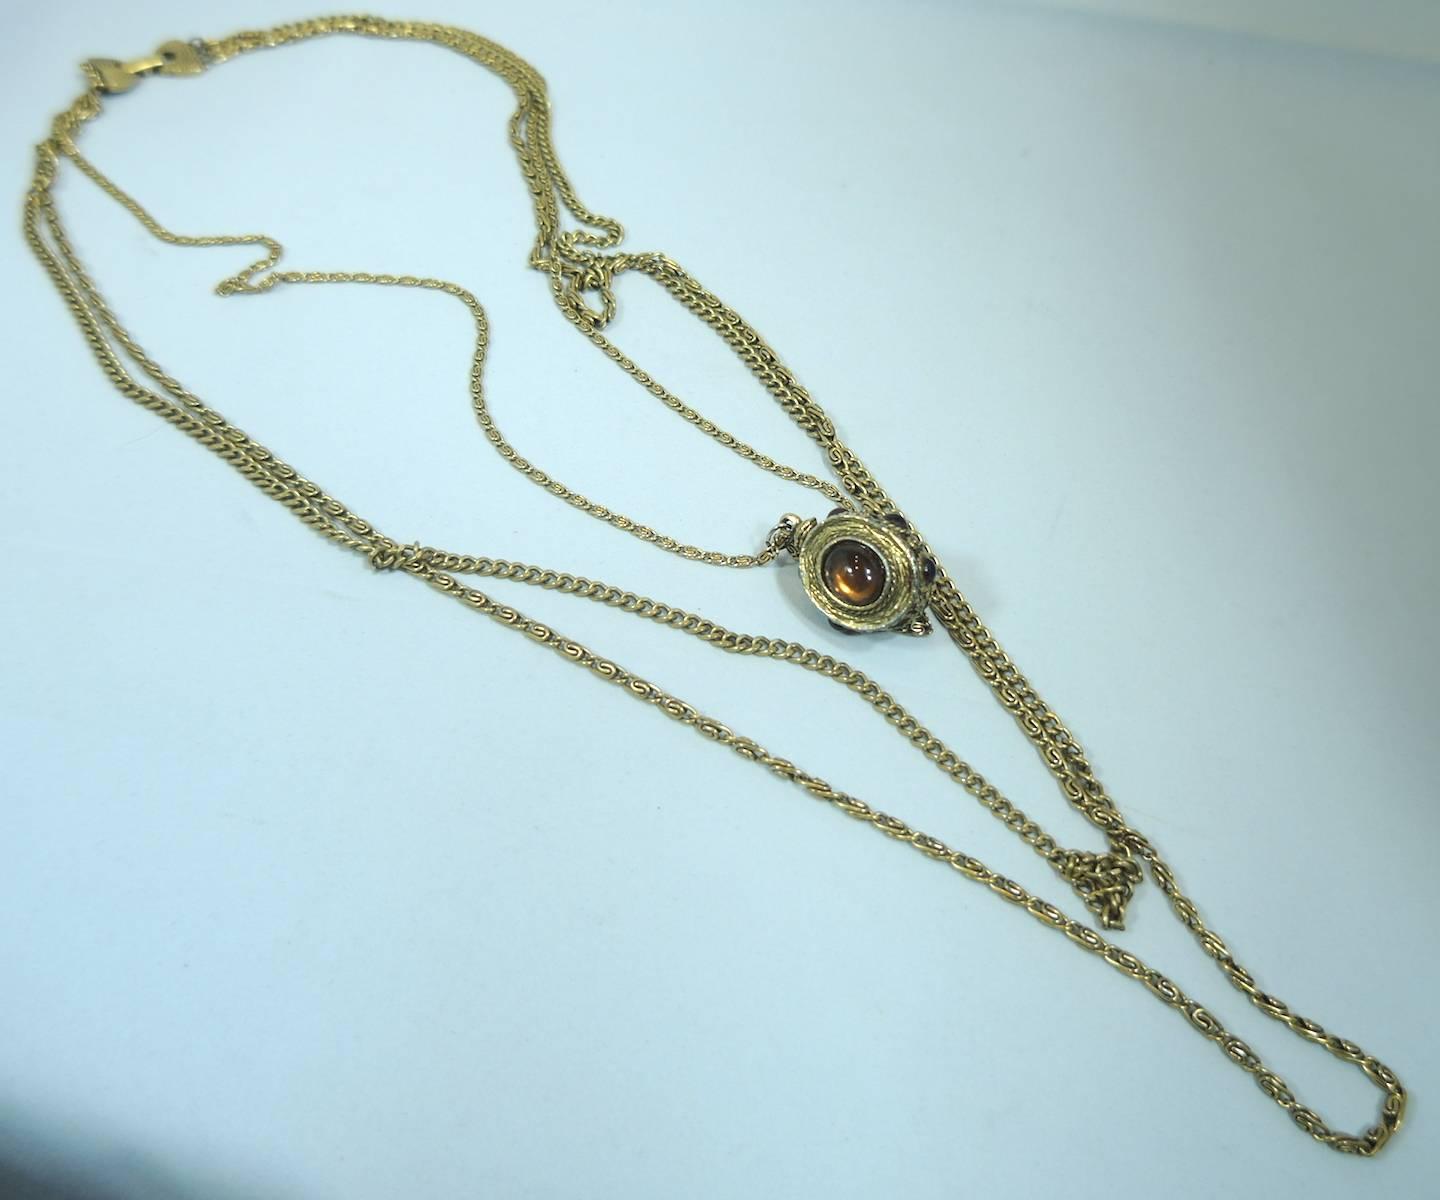 This is a signed Goldette from the 1950s that has 3 chains. The center chain has a faux citrine cabochon set in an intricately designed pendant and has smaller cabochons around it; the longest chain measures 36”. The pendant measures 1-1/4” x